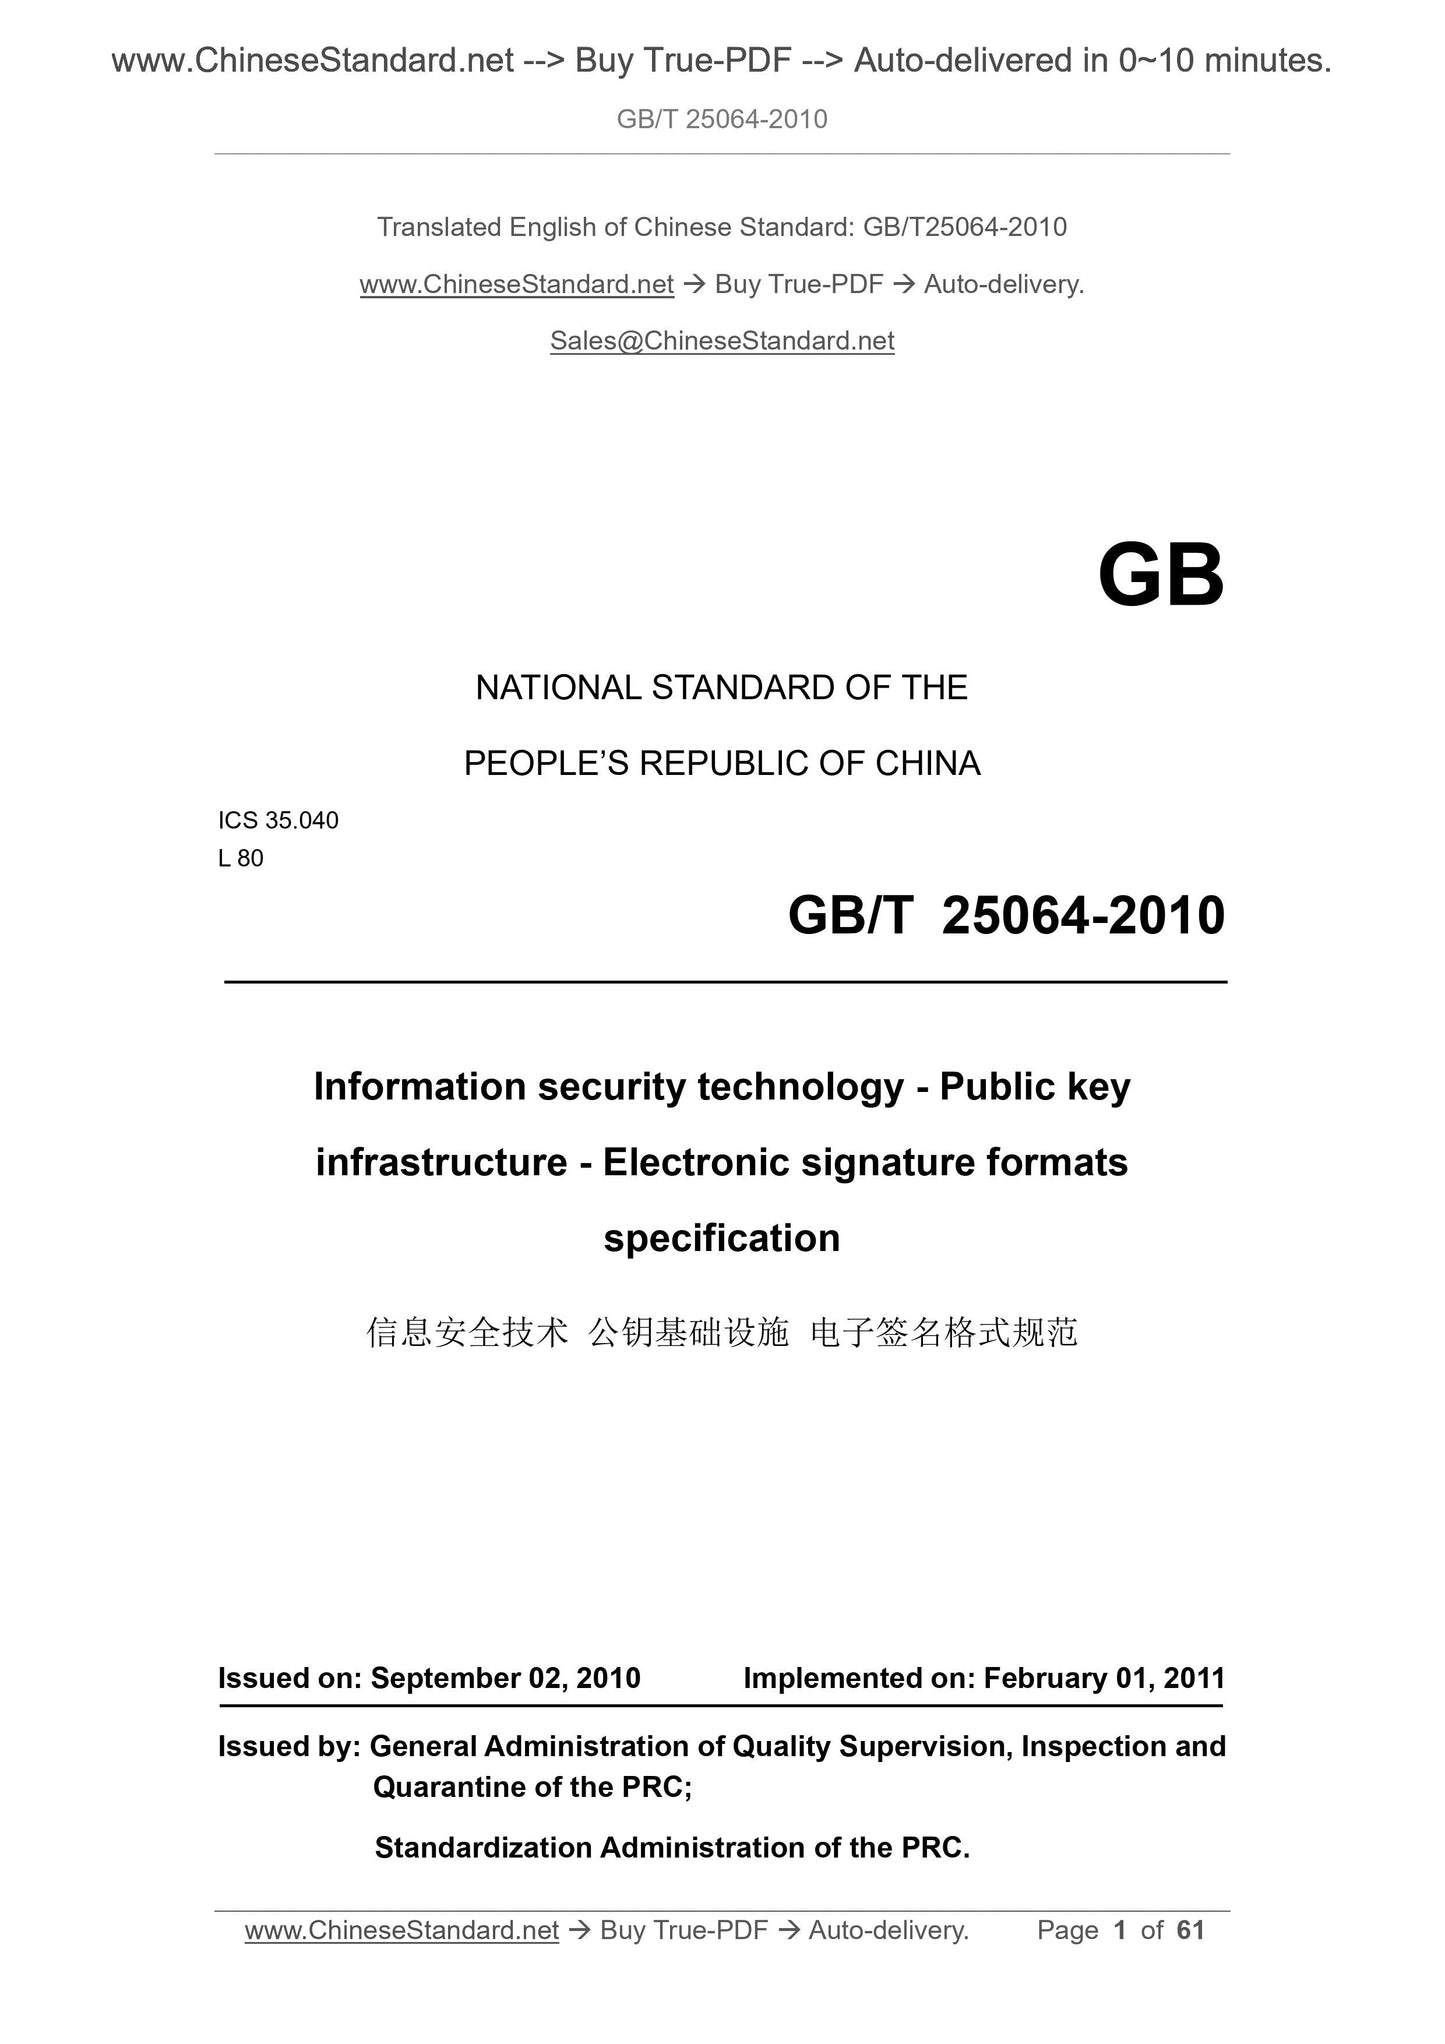 GB/T 25064-2010 Page 1